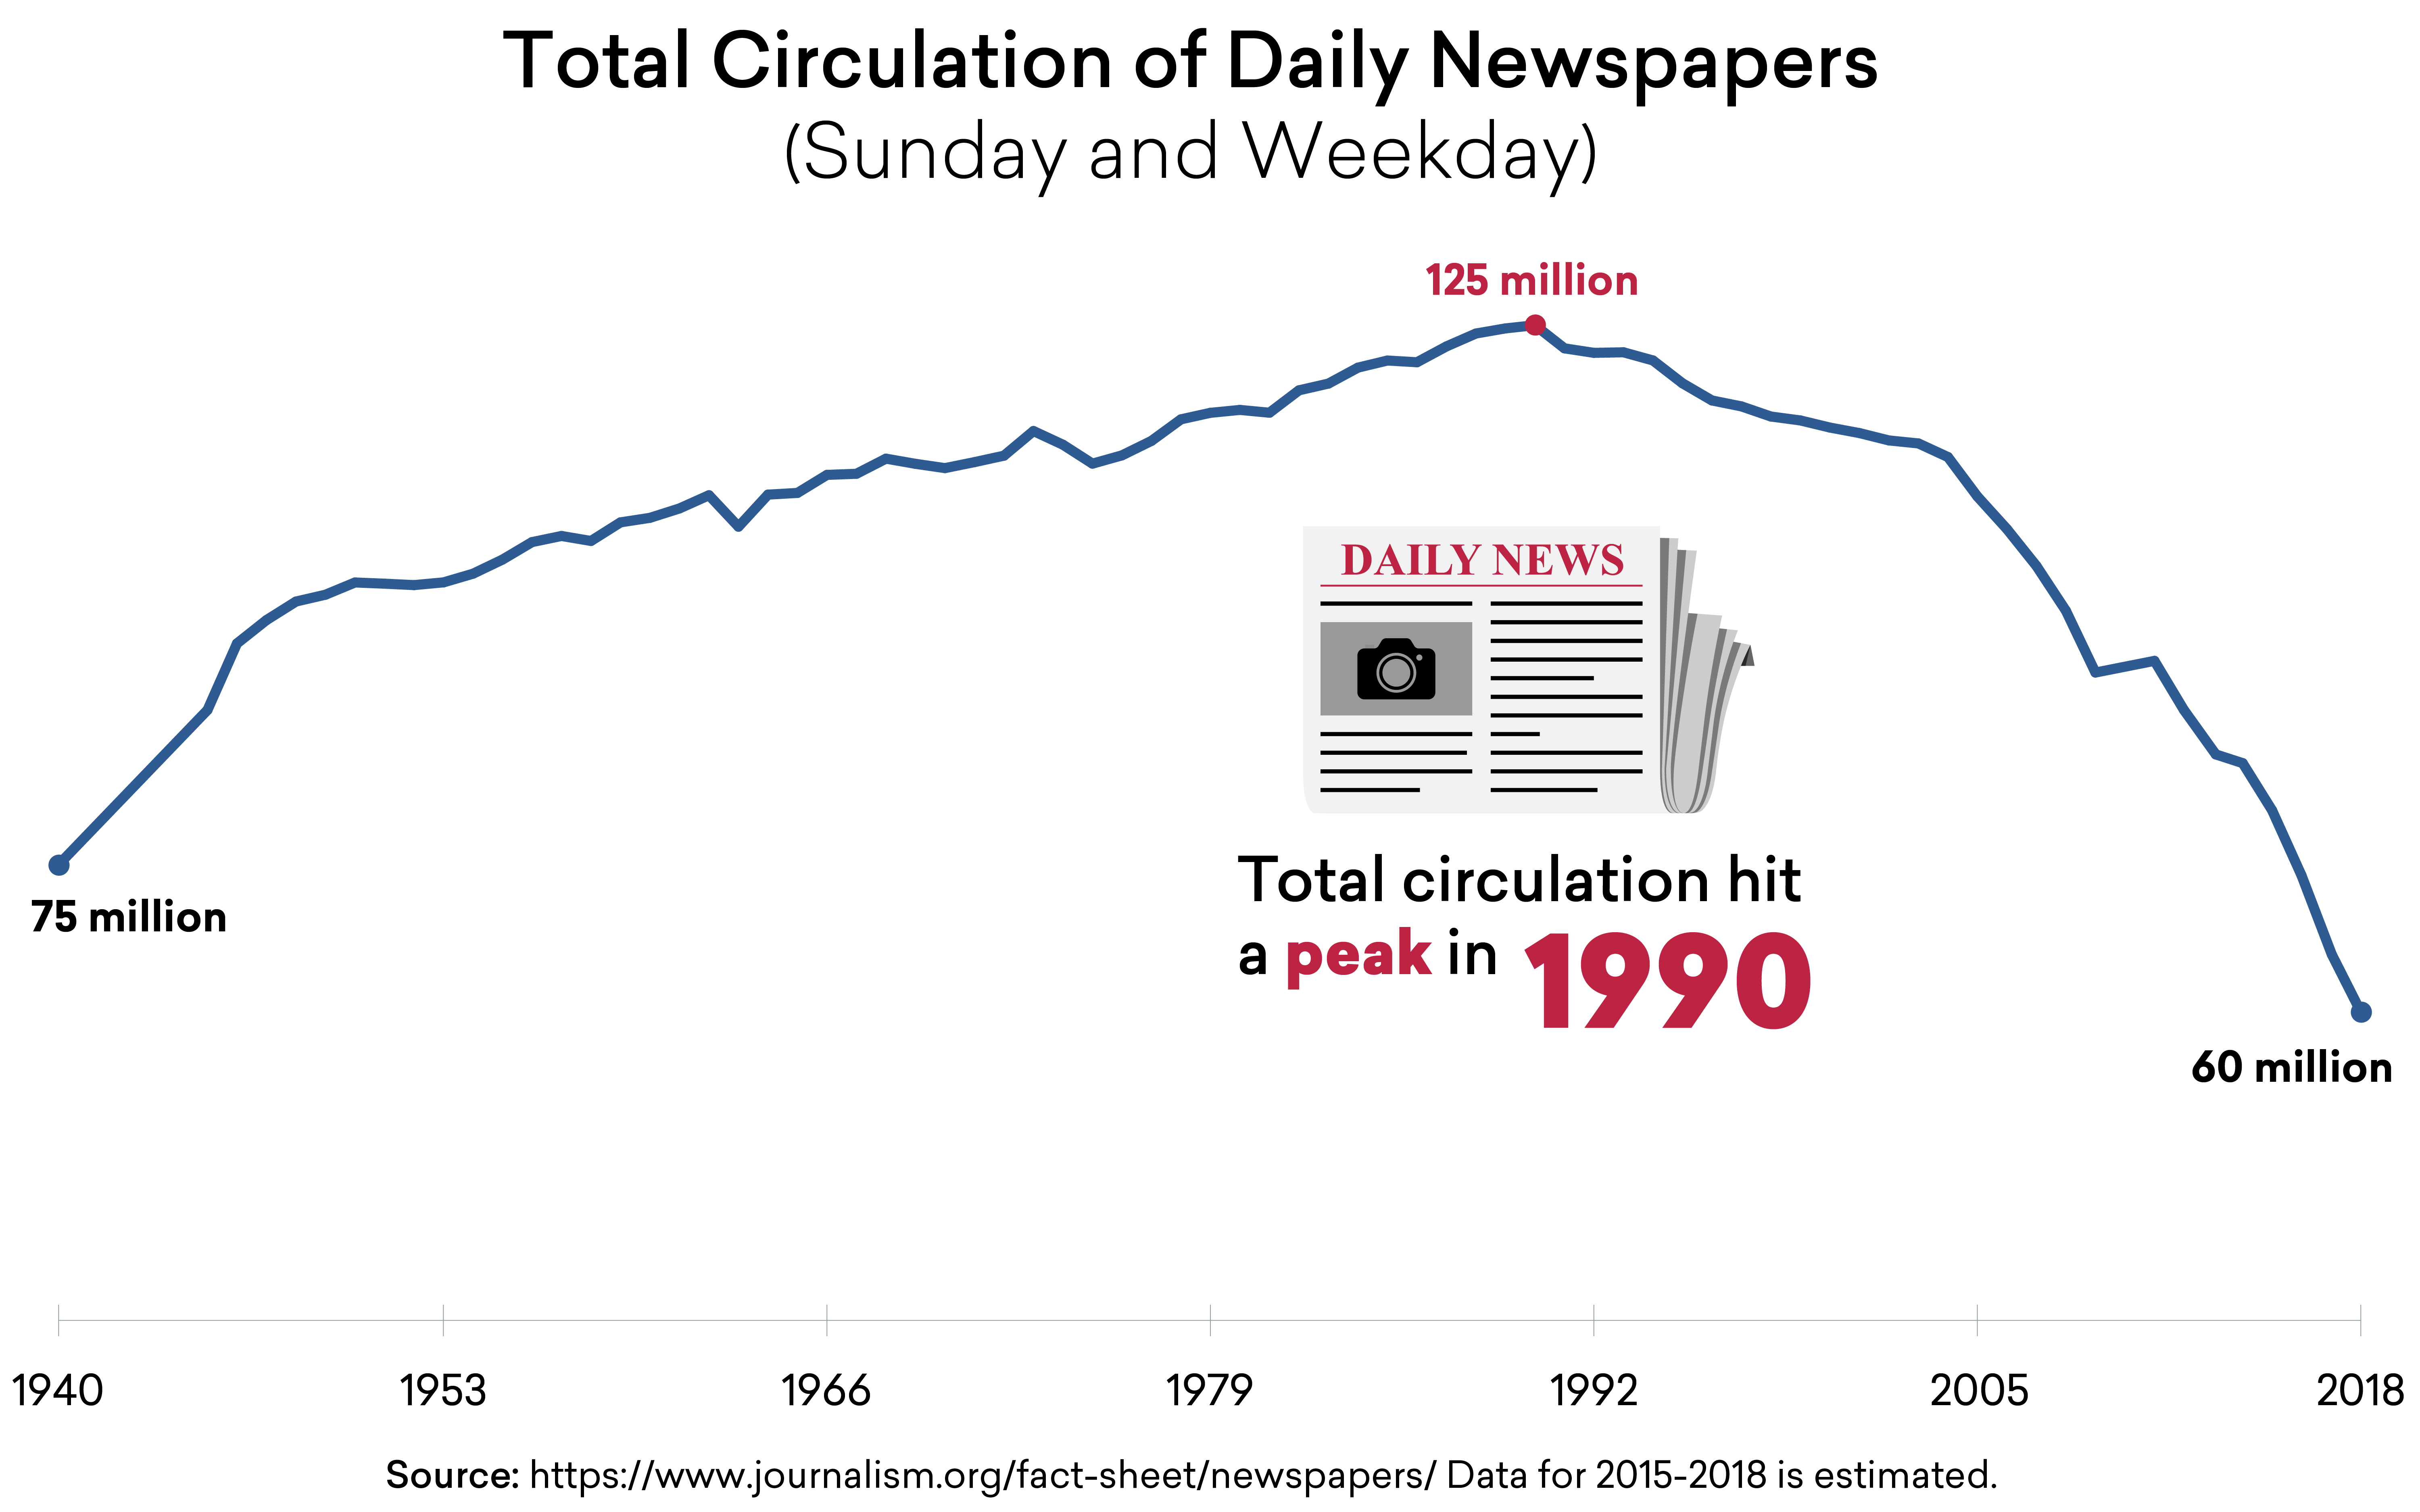 Circulation of Daily Newspapers